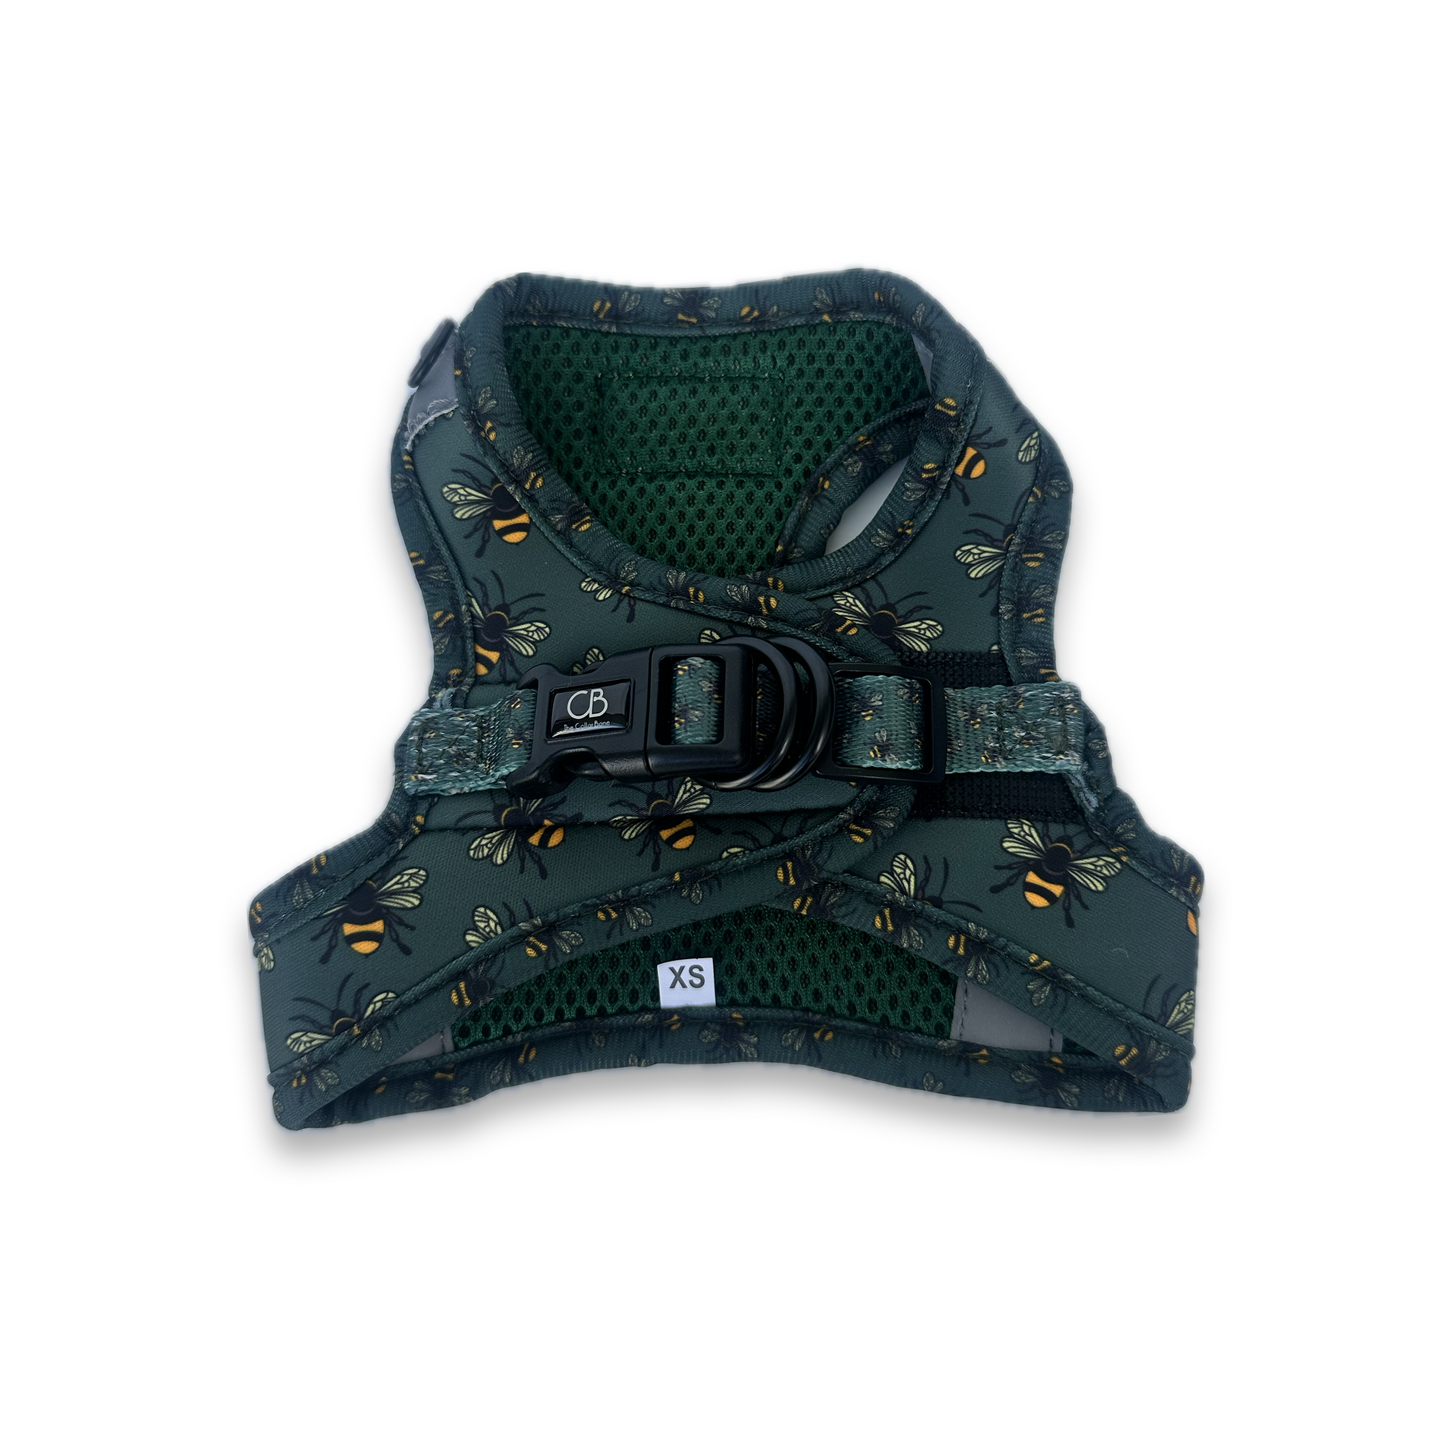 Teeny Step-In Vest/Harness in Forest Bee